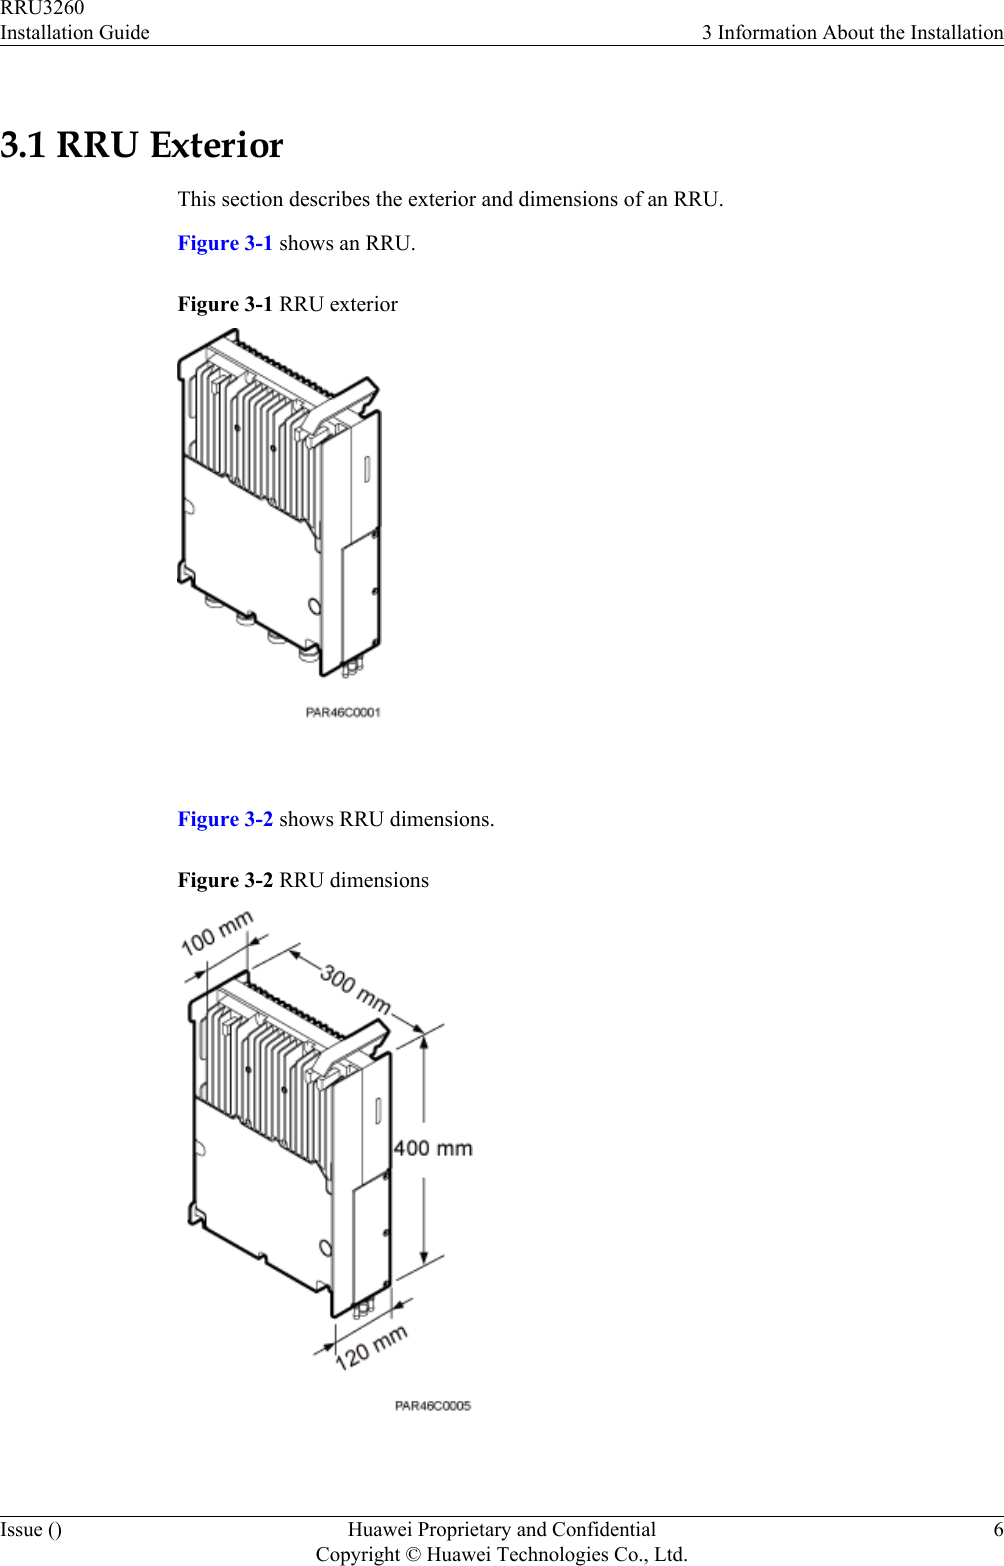 3.1 RRU ExteriorThis section describes the exterior and dimensions of an RRU.Figure 3-1 shows an RRU.Figure 3-1 RRU exterior Figure 3-2 shows RRU dimensions.Figure 3-2 RRU dimensions RRU3260Installation Guide 3 Information About the InstallationIssue () Huawei Proprietary and ConfidentialCopyright © Huawei Technologies Co., Ltd.6